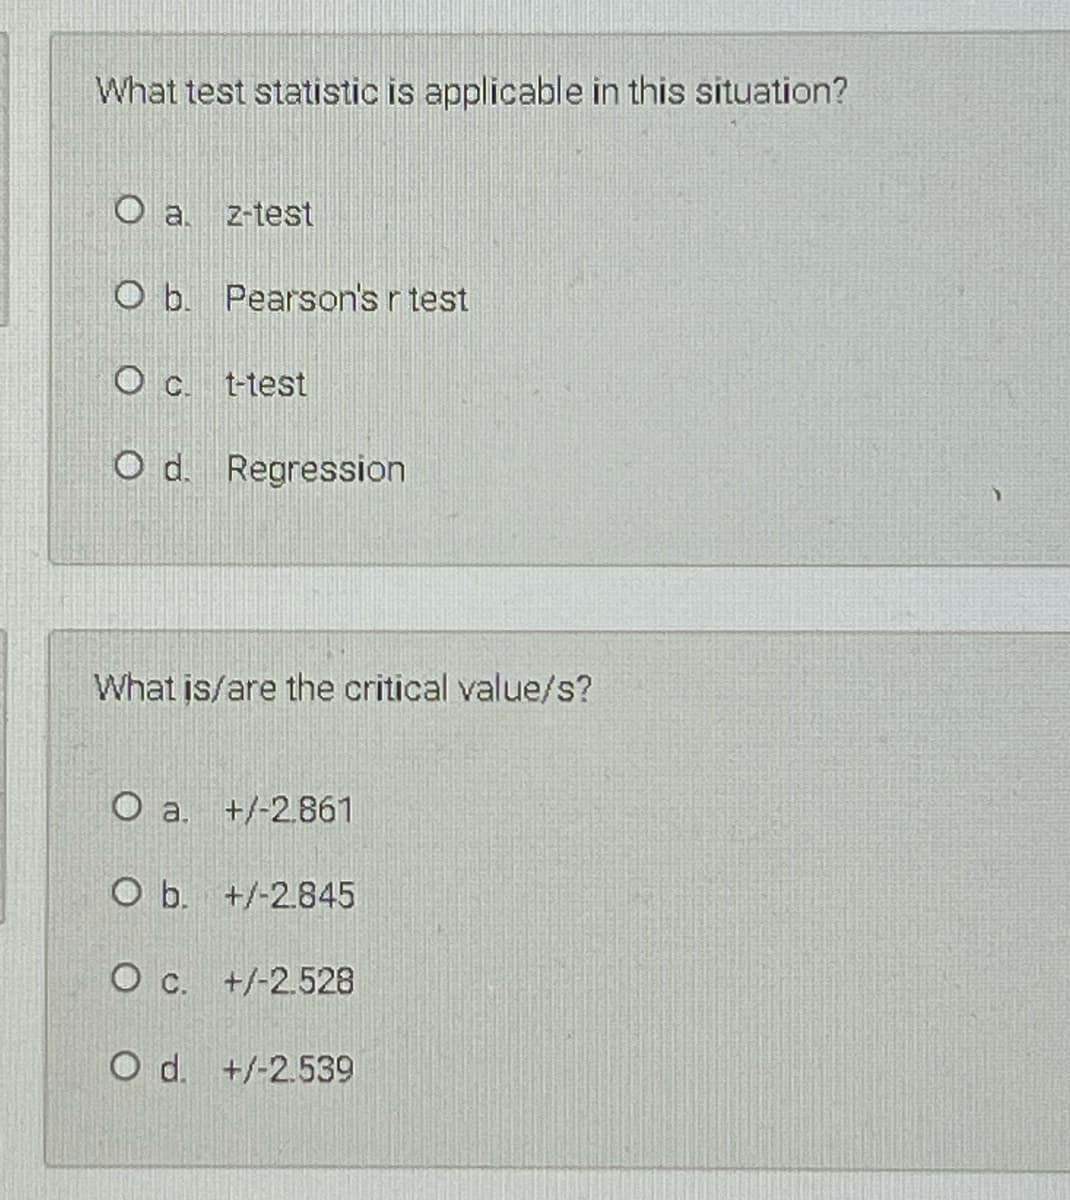 What test statistic is applicable in this situation?
O a. z-test
O b. Pearson's r test
t-test
O d. Regression
What is/are the critical value/s?
O a.
+/-2.861
O b. +/-2.845
O c. +/-2.528
O d. +/-2.539
